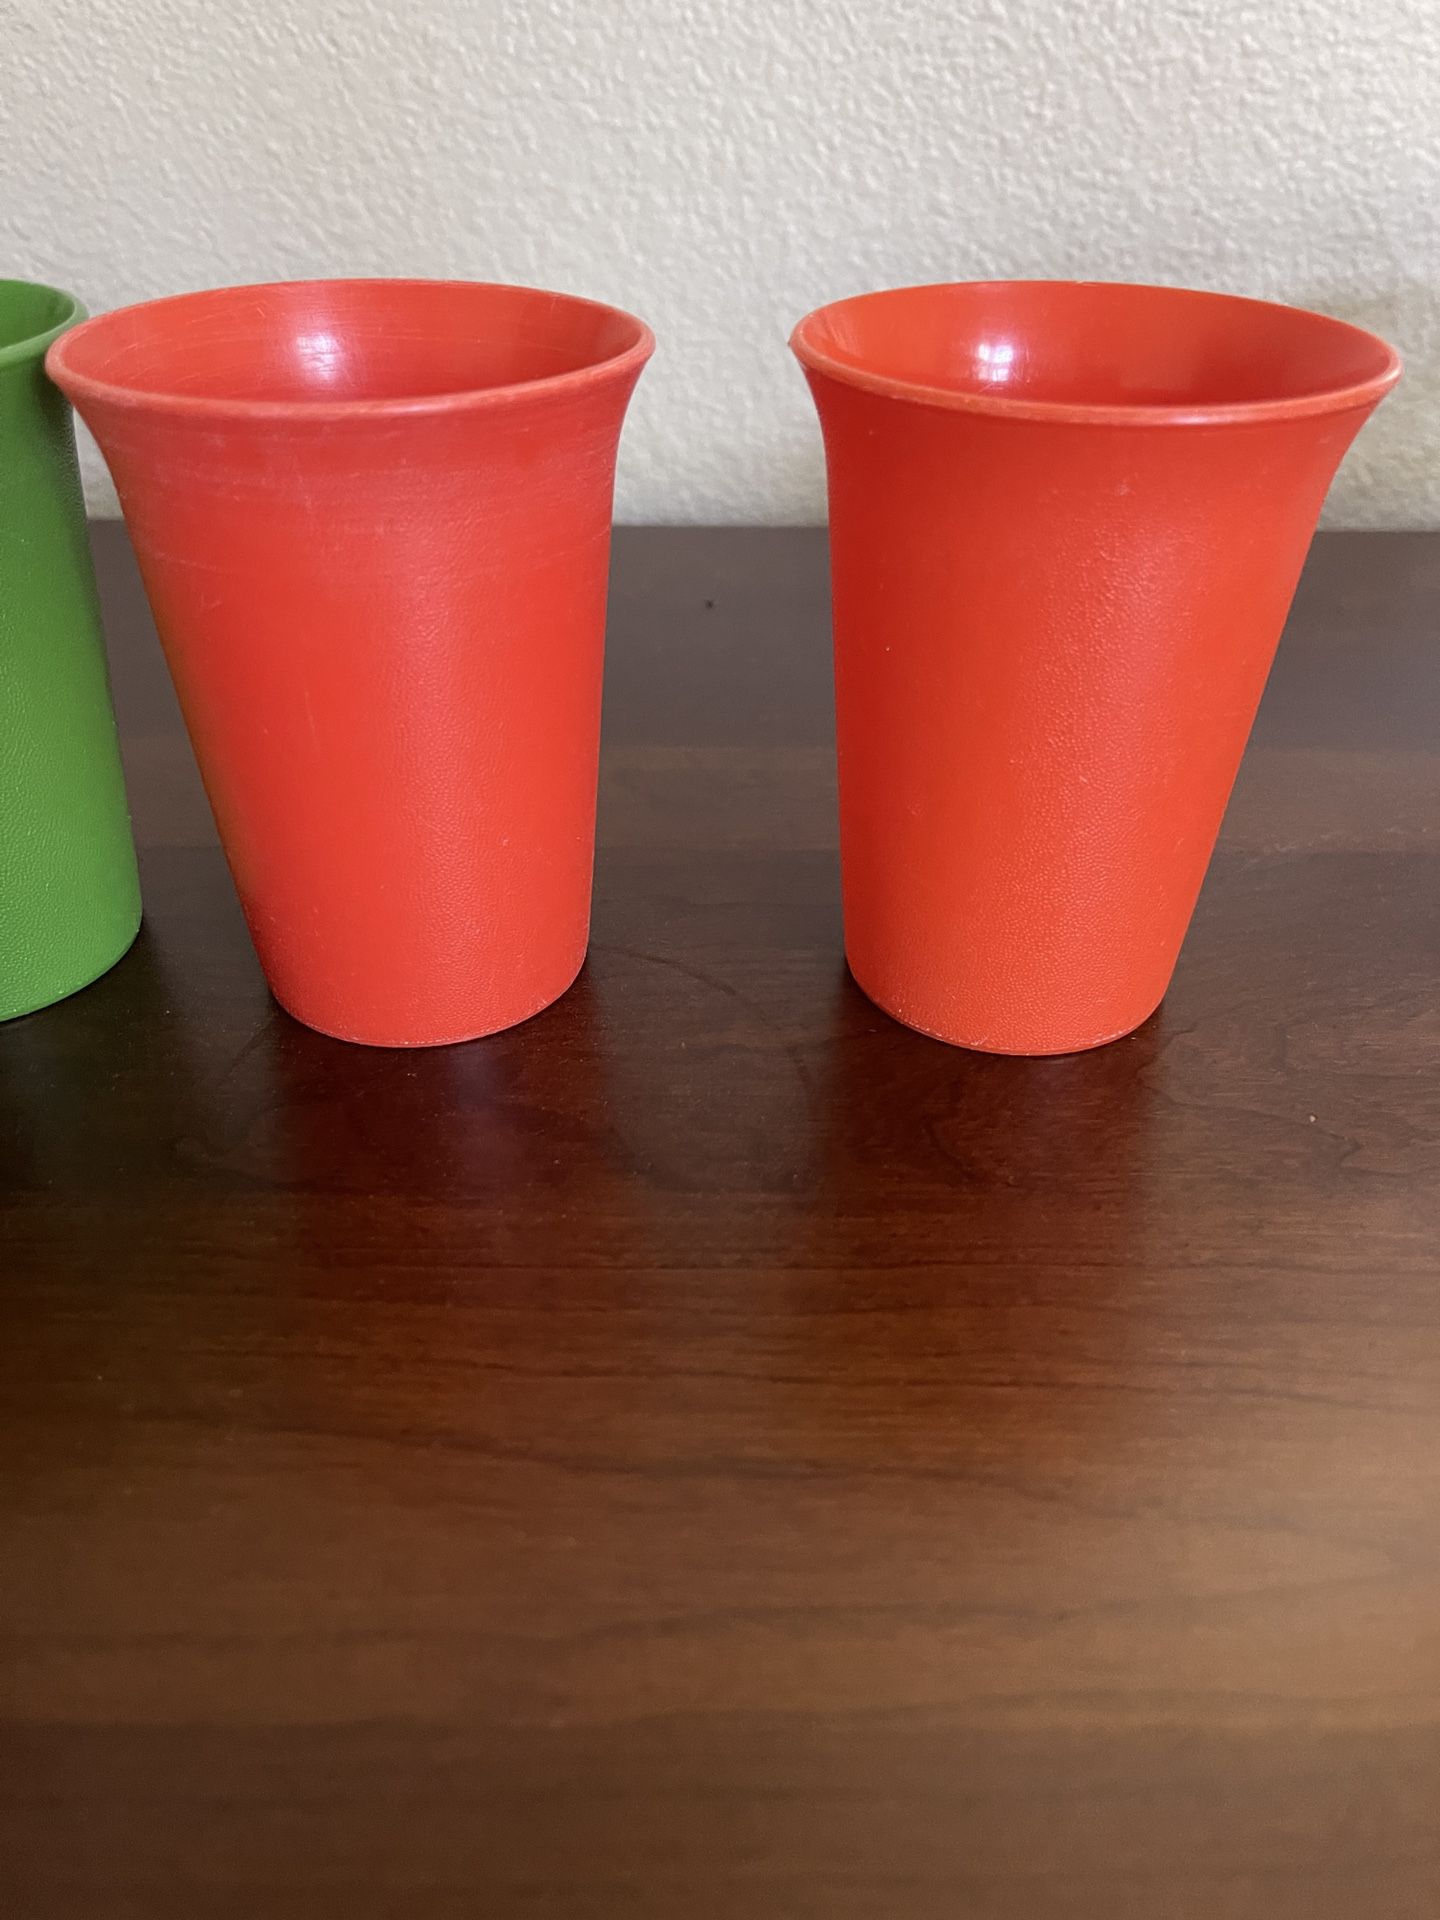 Vintage Tupperware For Pieces for Sale in Wichita, KS - OfferUp